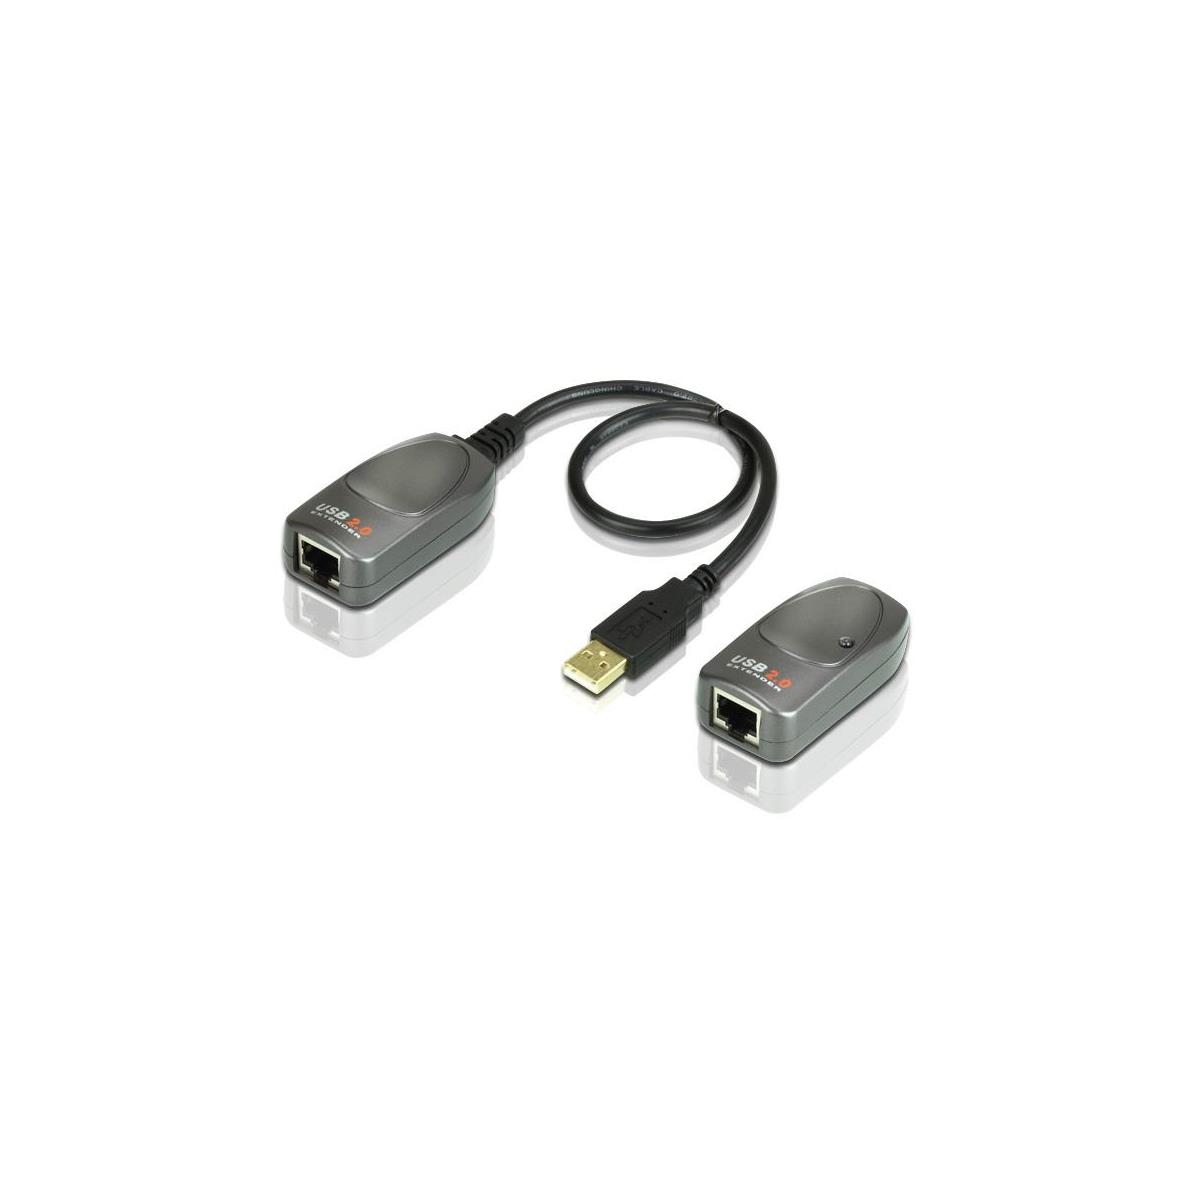 Photos - Other for Computer ATEN UCE260 USB 2.0 Extender, Up to 196' Signal Range 